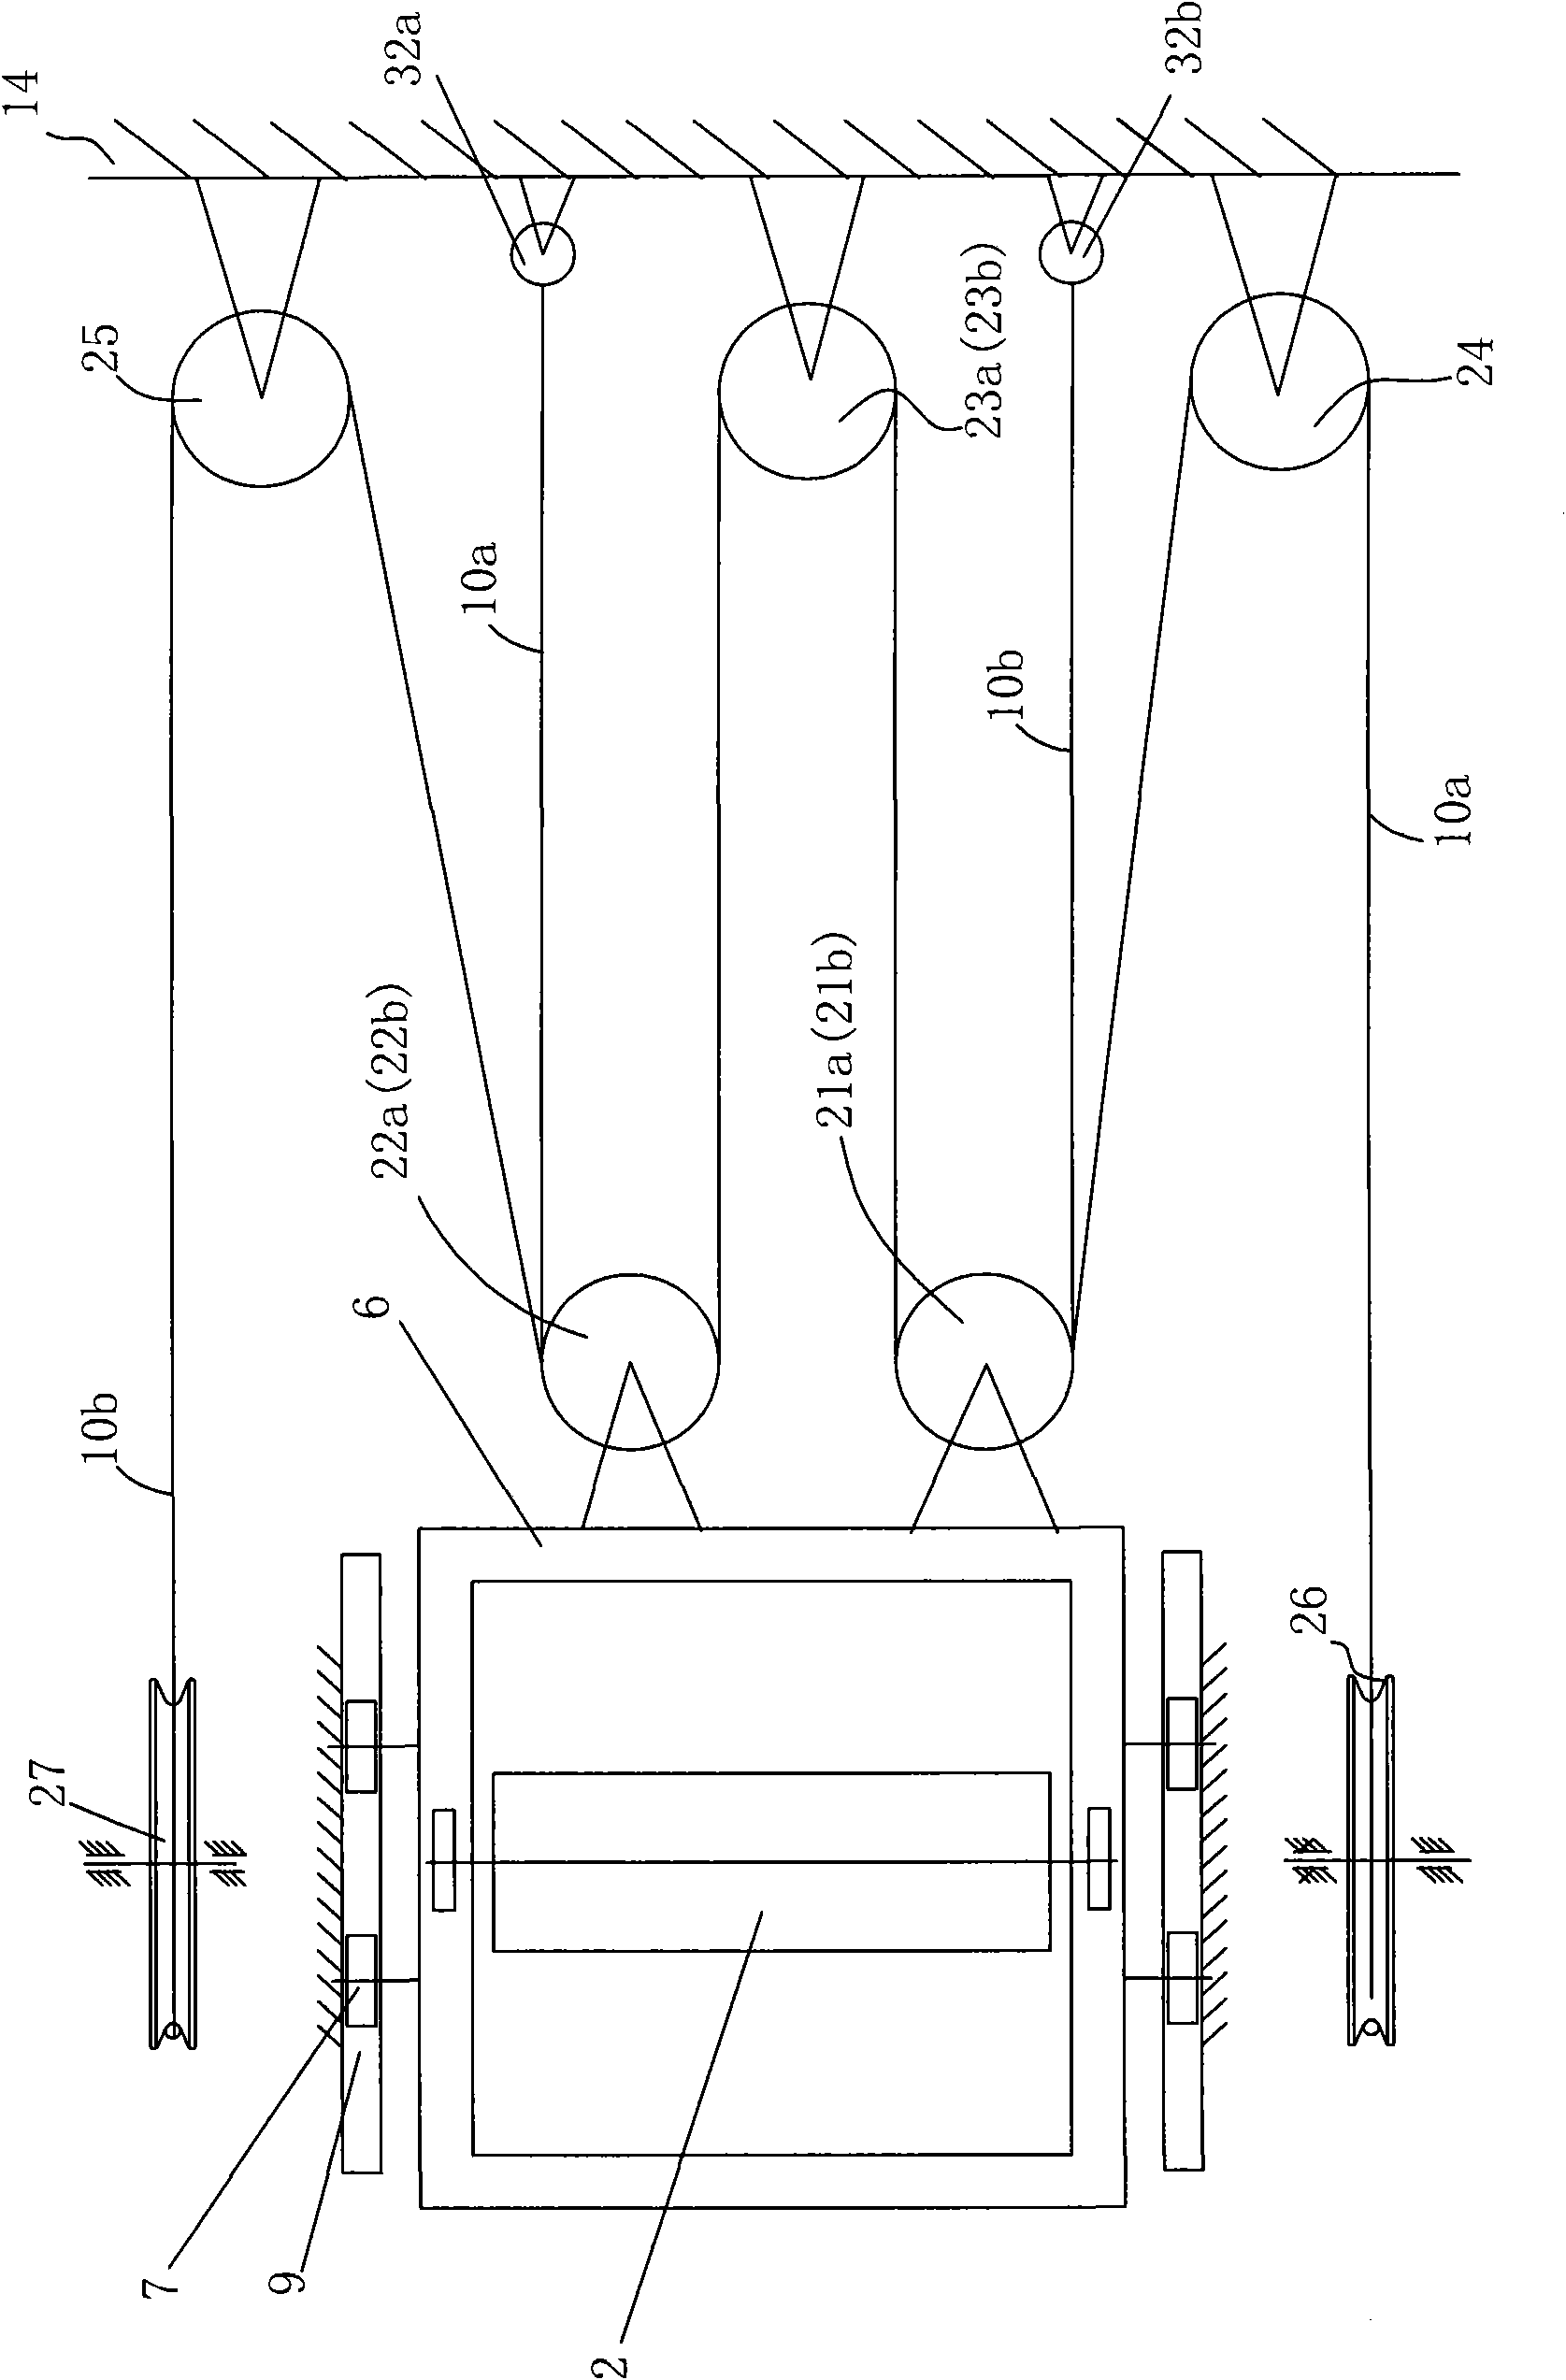 Tension device for belt conveyer